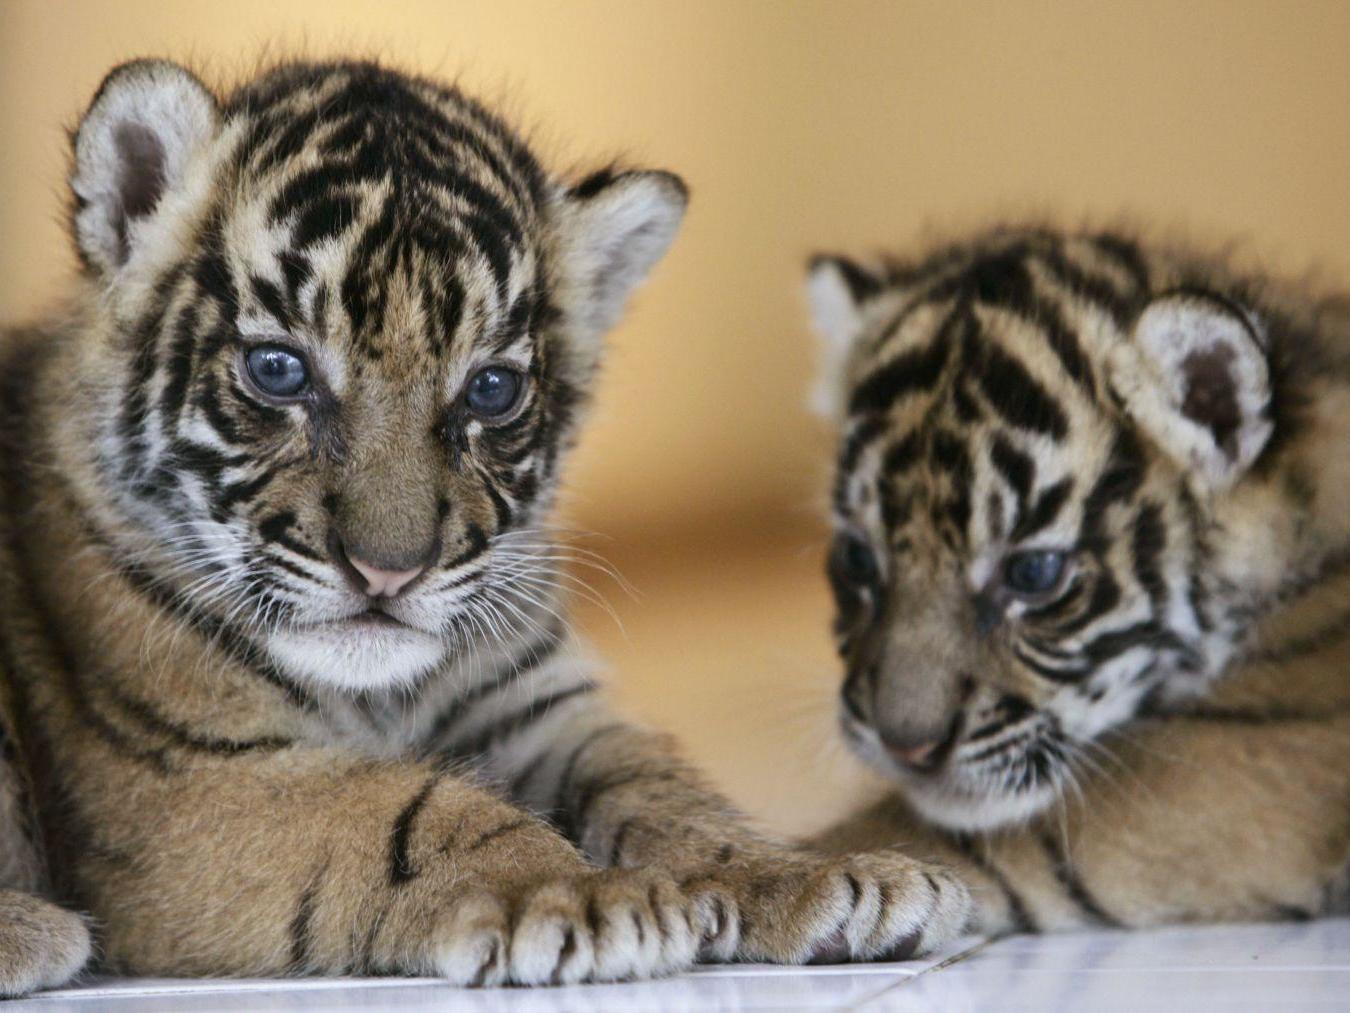 There are only around 3,900 tigers left in the wild